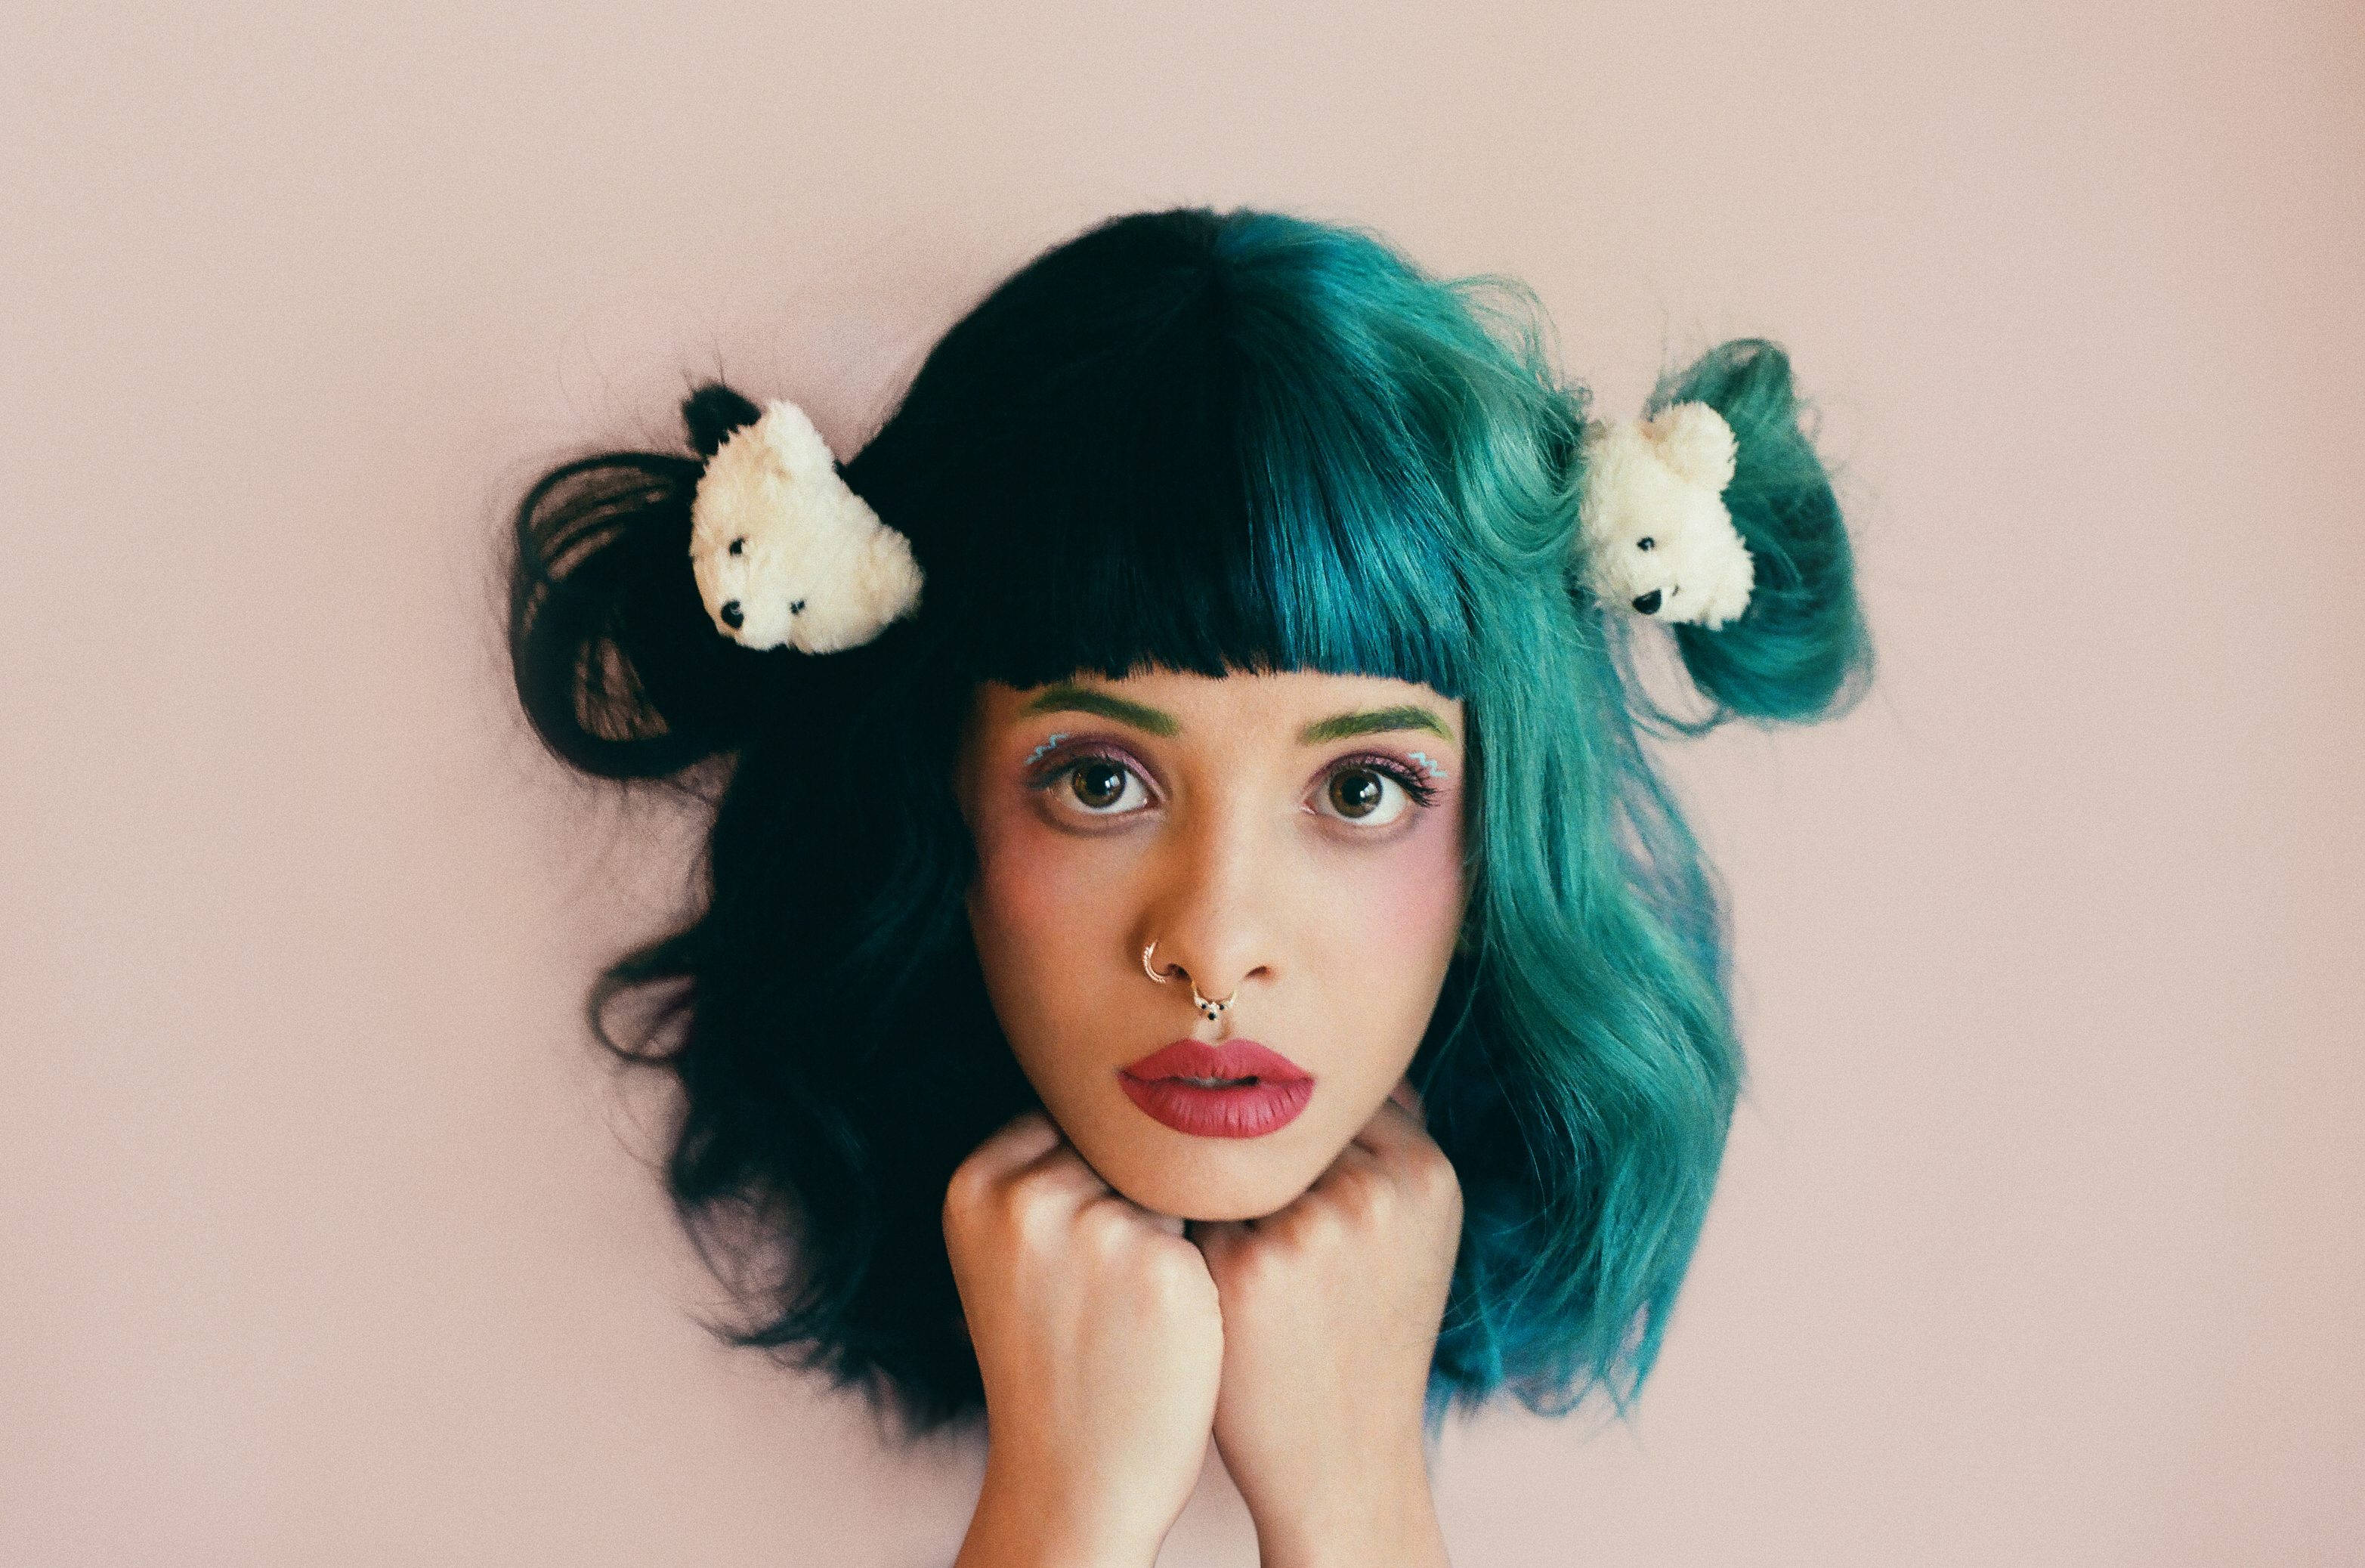 A woman with green hair and two bears on her head - Melanie Martinez